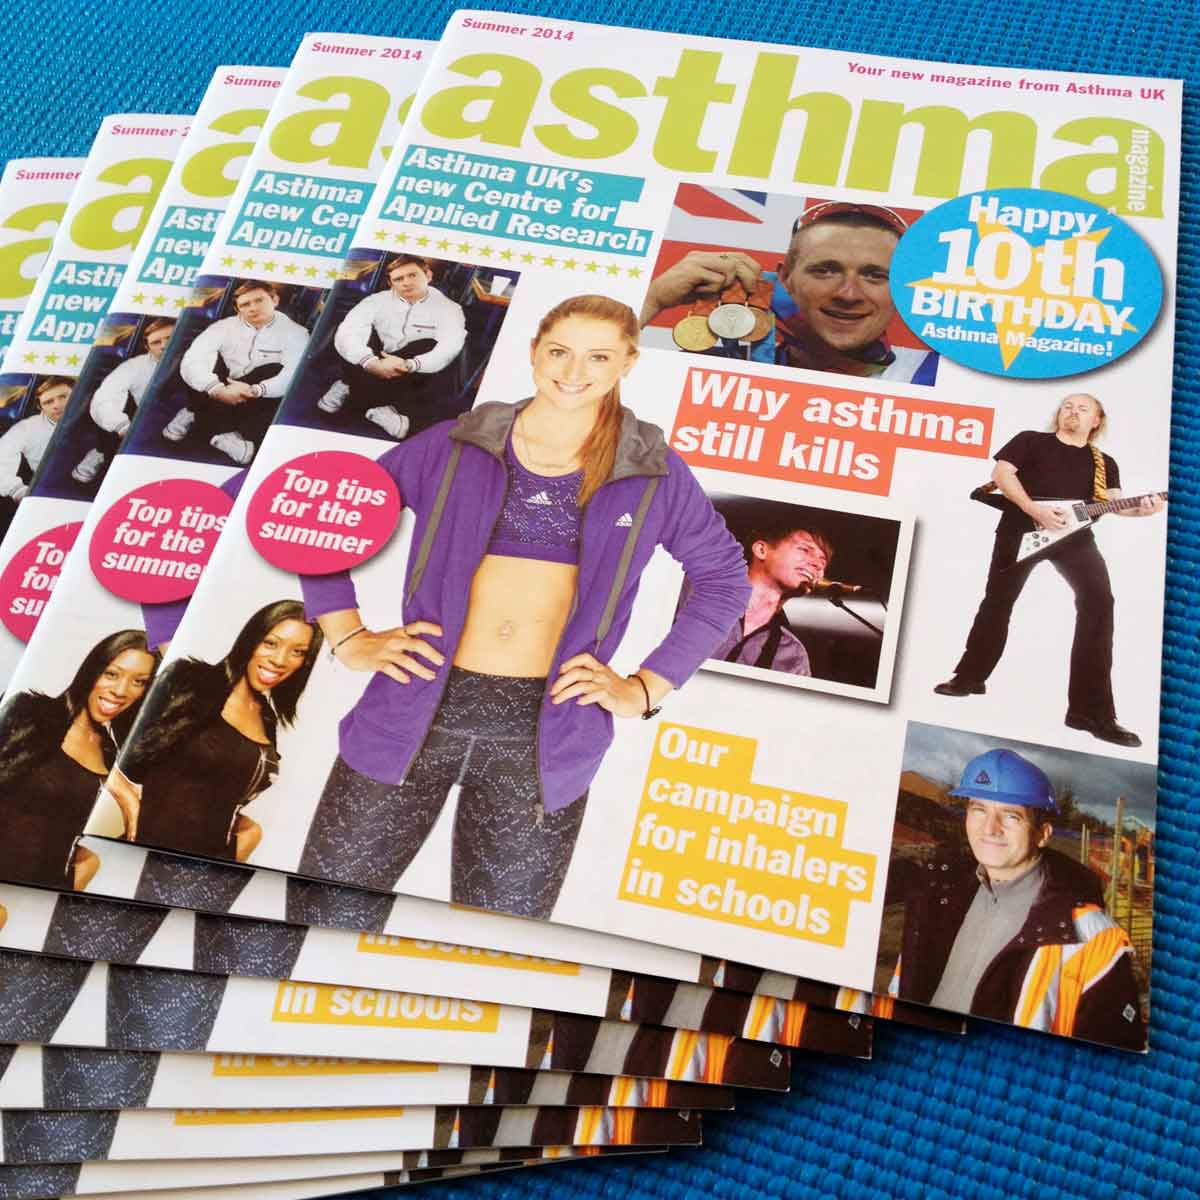 Asthma UK members' magazine front cover designed by Ideology design and marketing